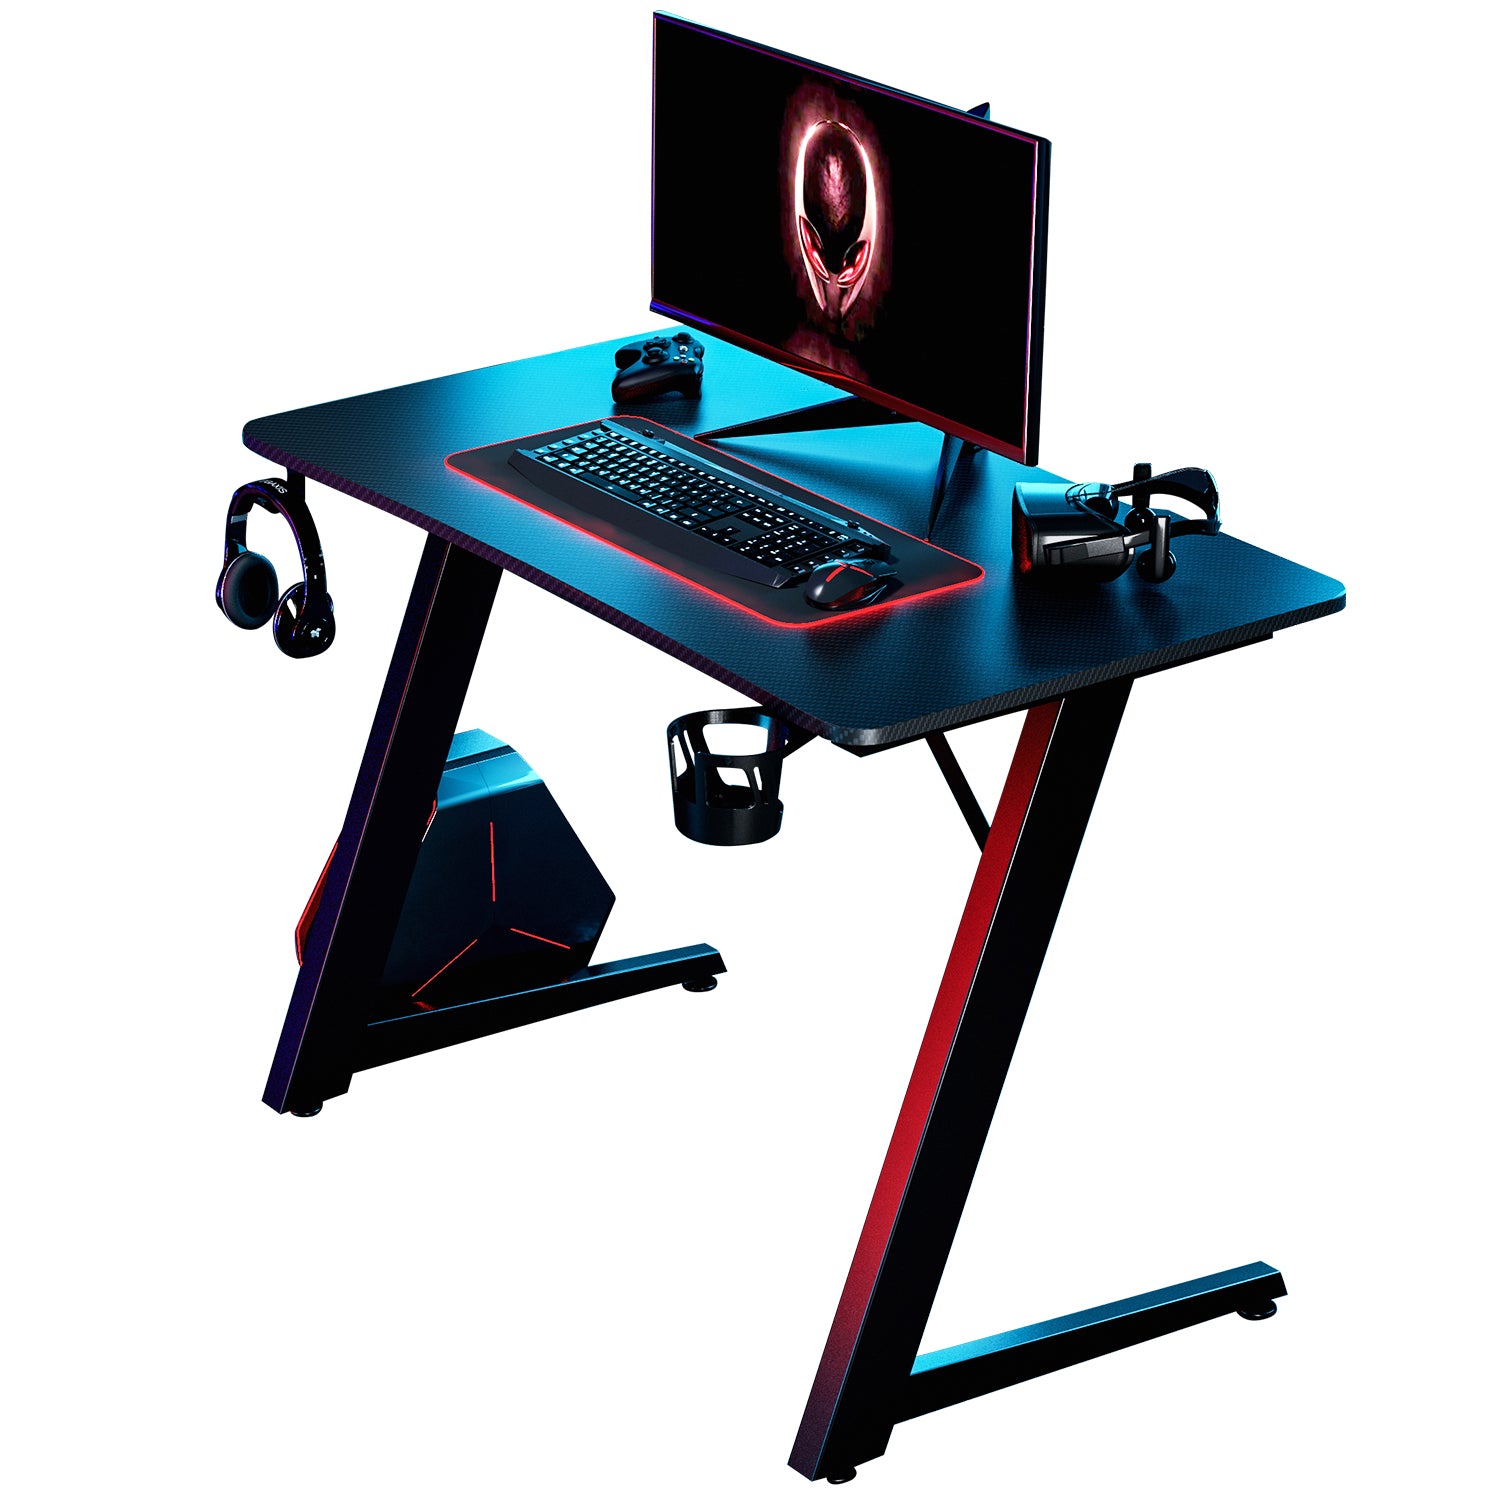 What Desks Are Used for Esports?